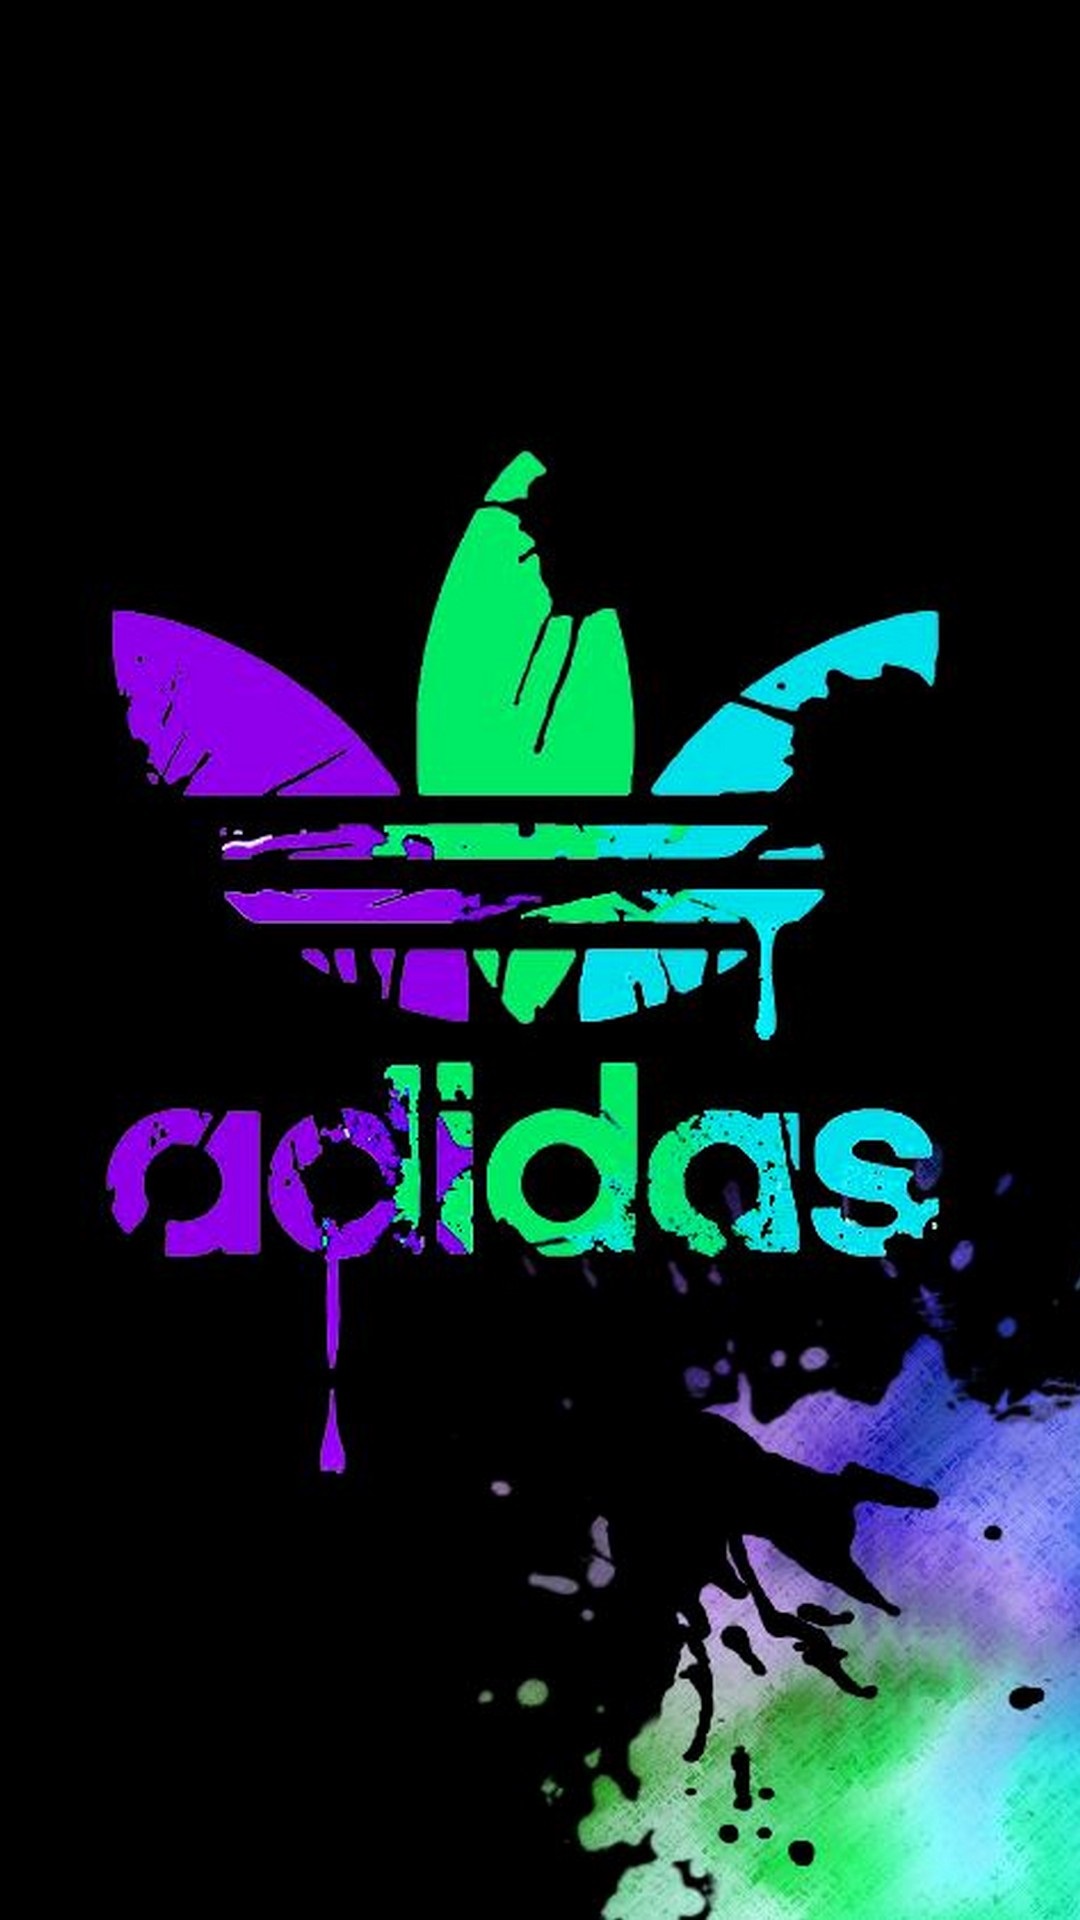 Wallpapers iPhone Adidas Logo With high-resolution 1080X1920 pixel. You can use this wallpaper for your iPhone 5, 6, 7, 8, X, XS, XR backgrounds, Mobile Screensaver, or iPad Lock Screen